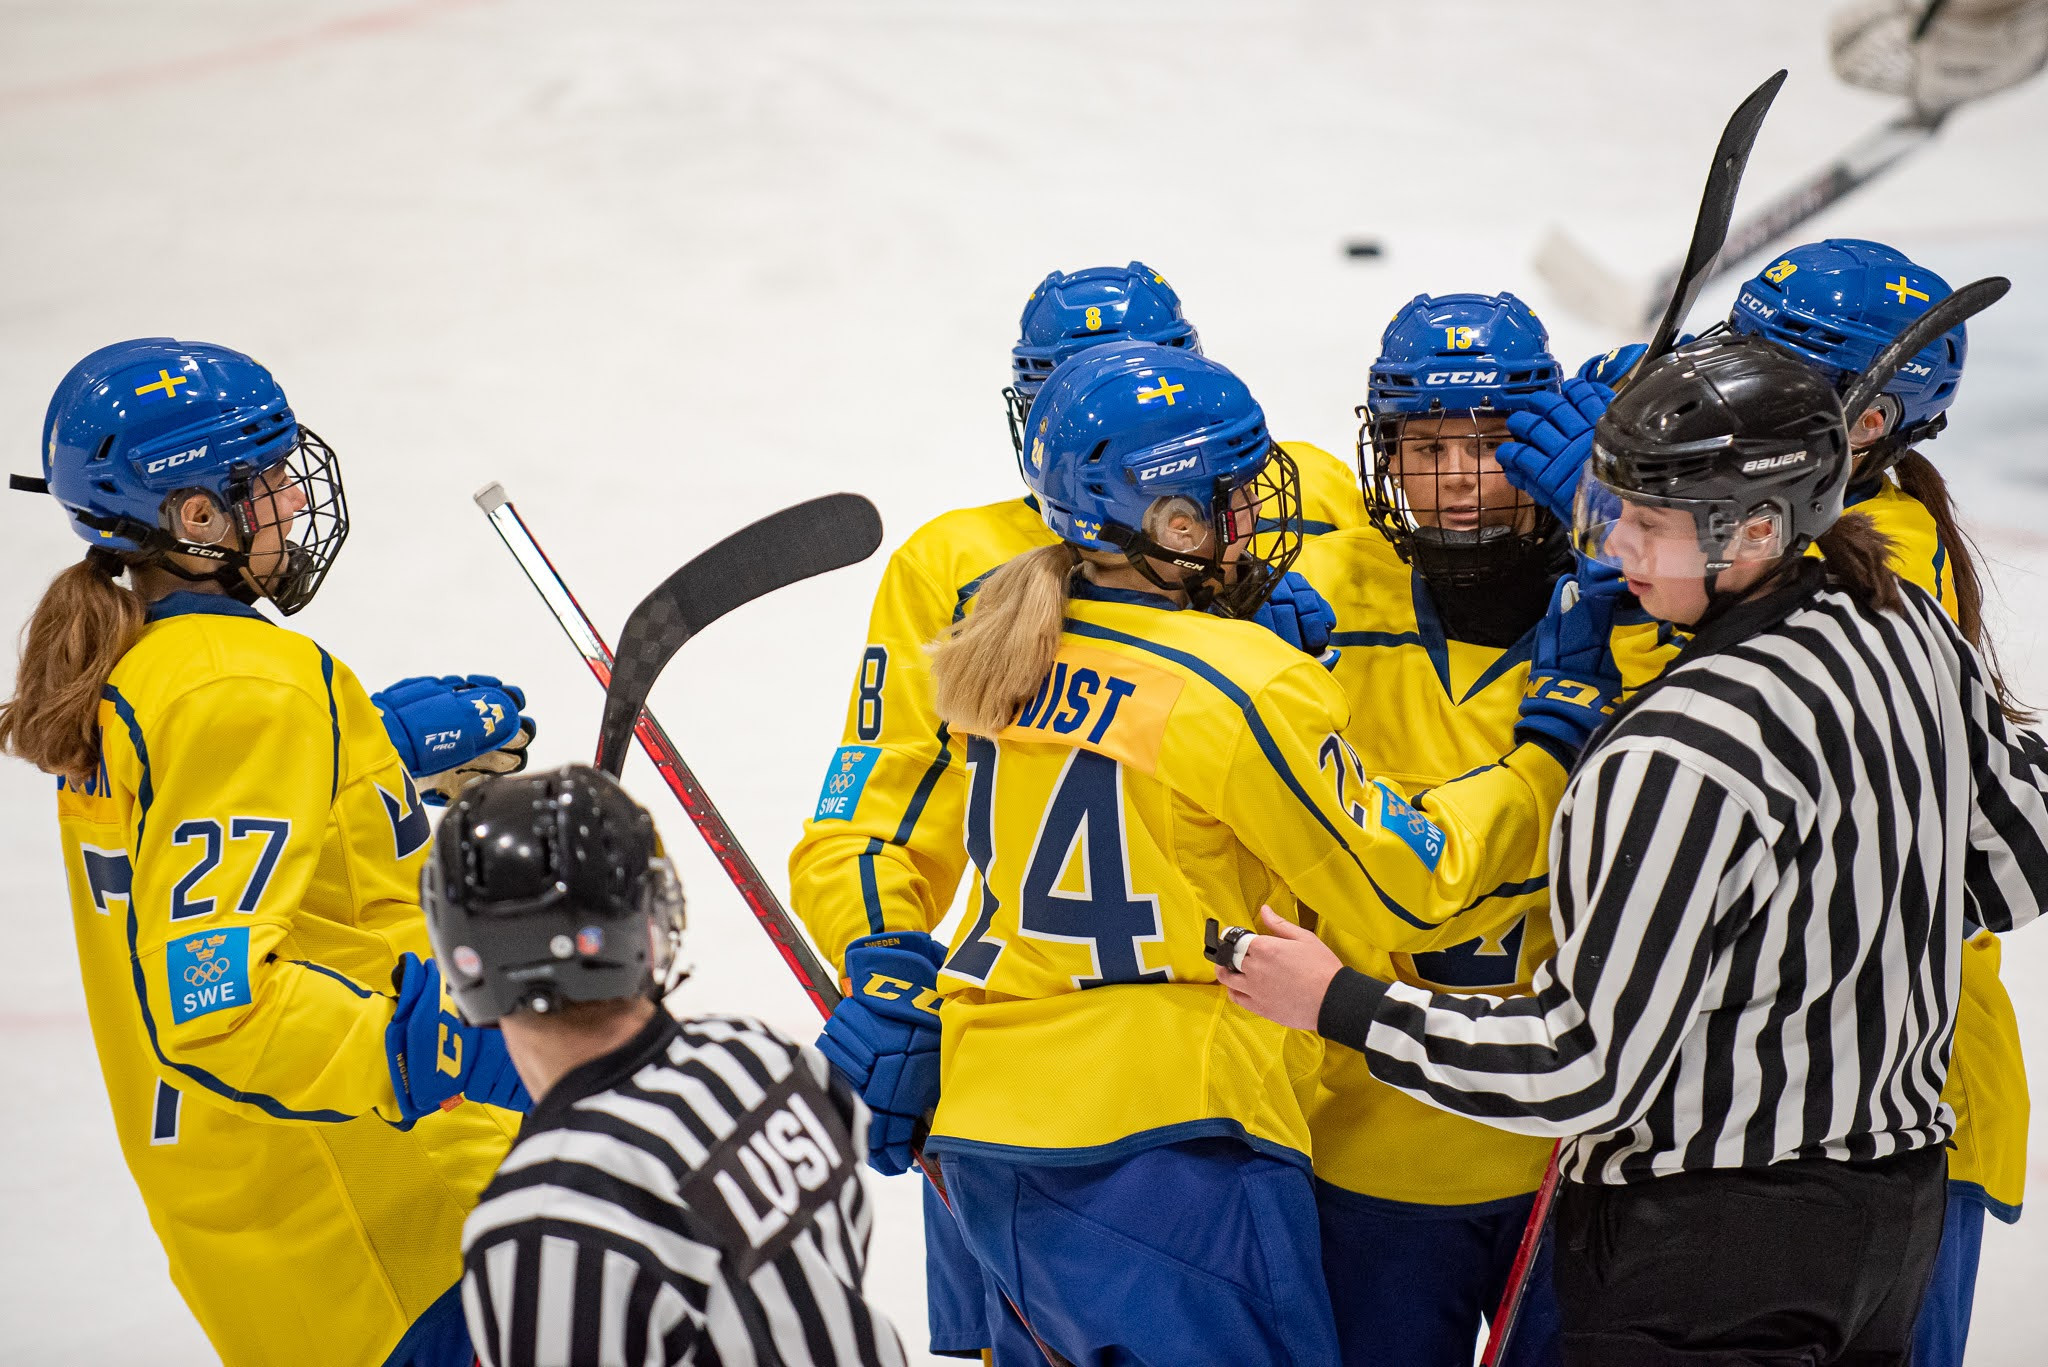 The Swedes scored seven goals across their two preliminary round matches against Slovakia and Finland ©Hannu Kilpeläinen/EYOF 2022 Vuokatti